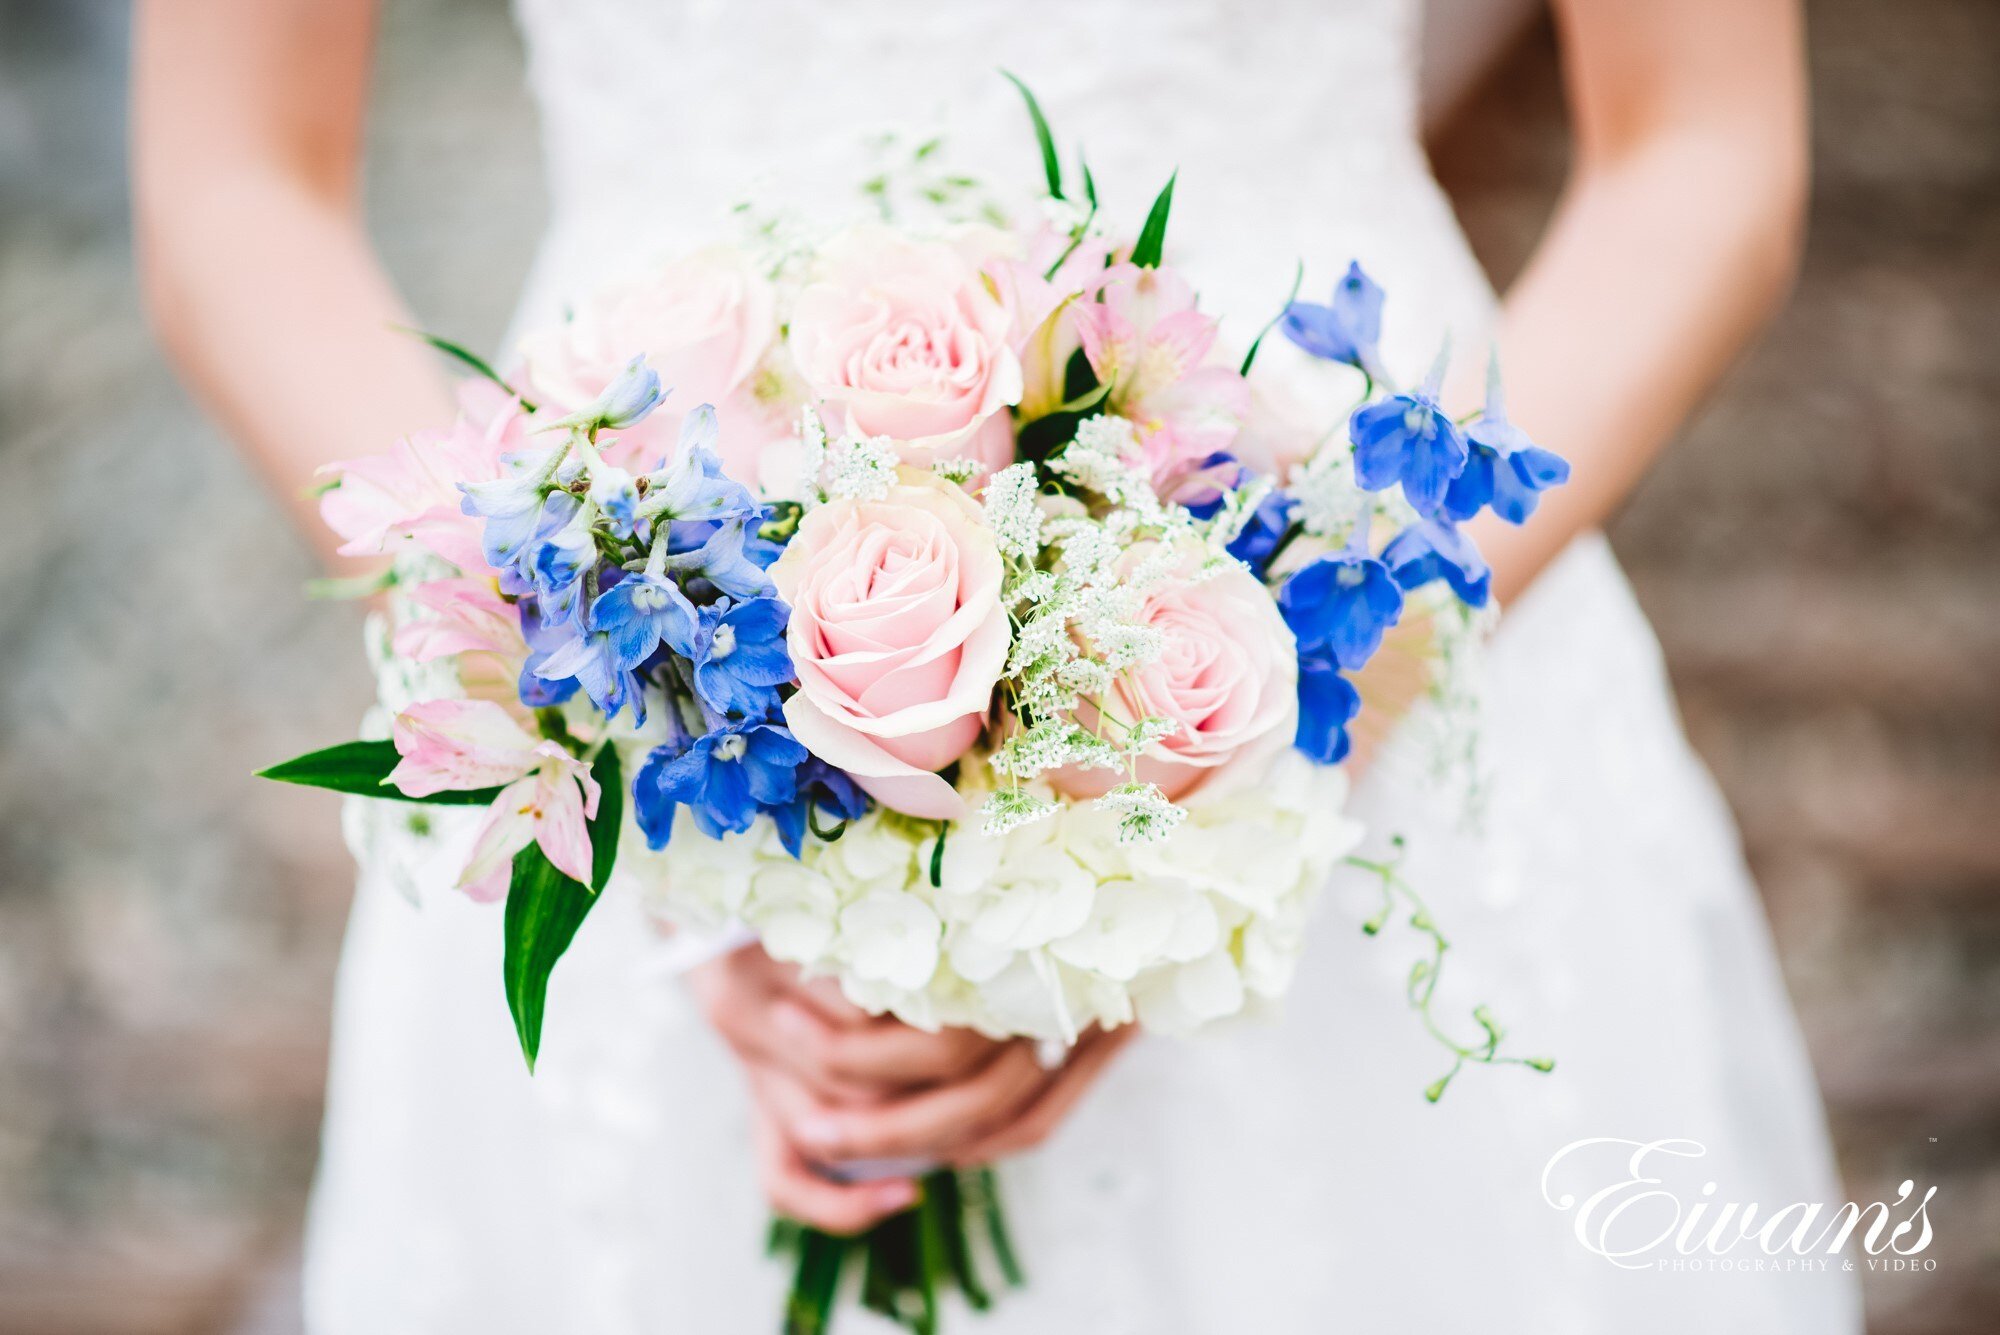 Expert Advice on How Much to Spend on Wedding Flowers